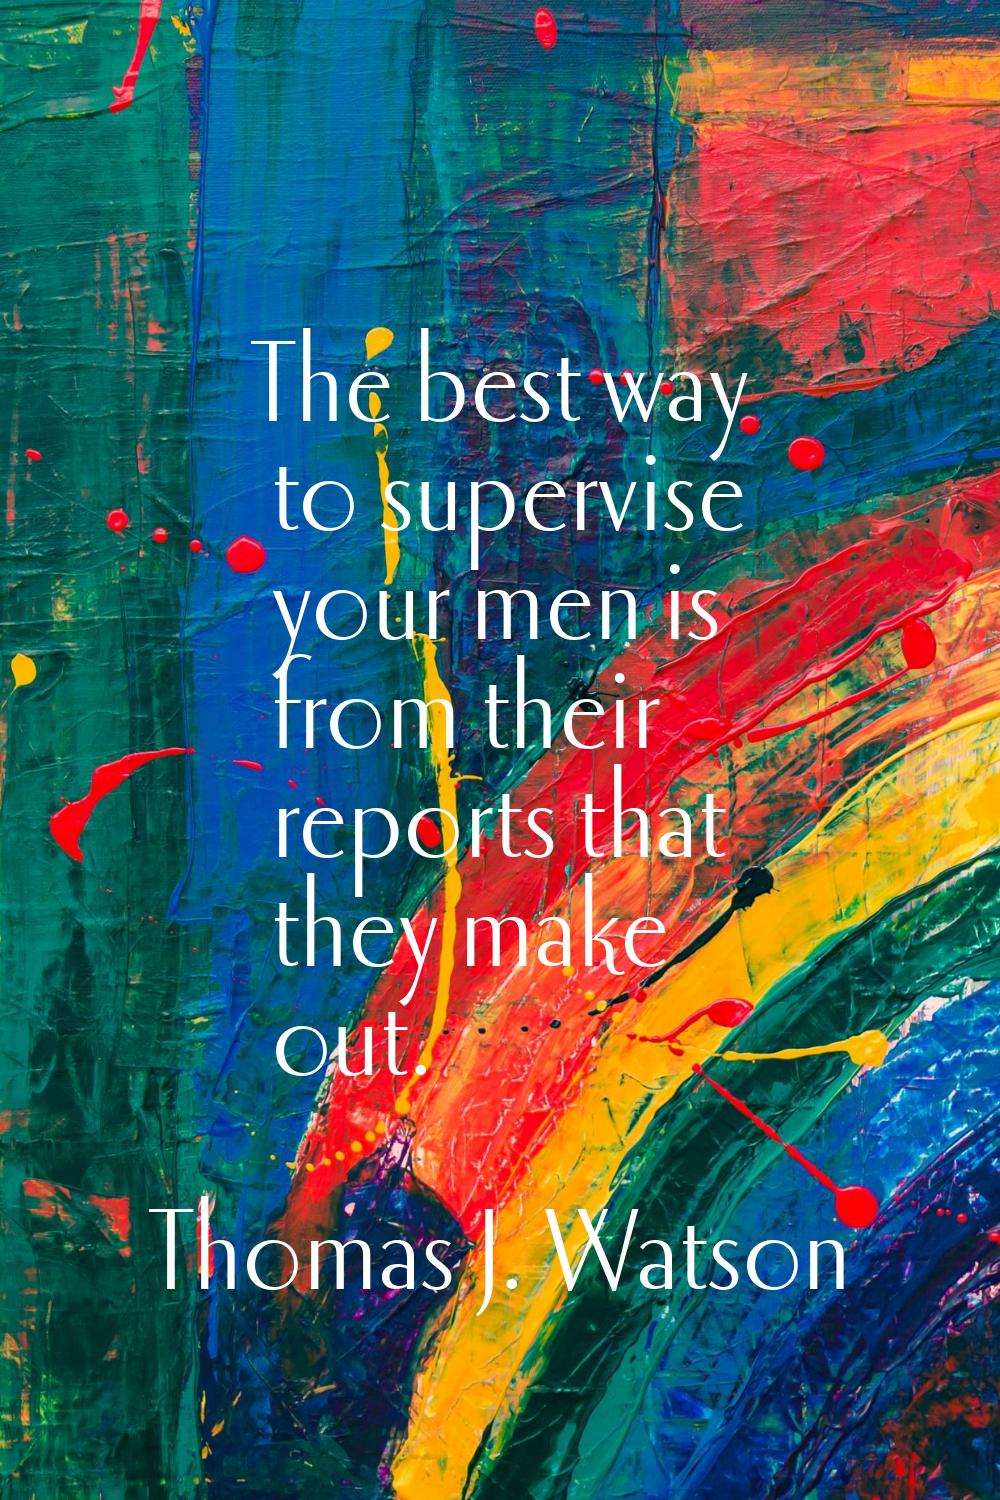 The best way to supervise your men is from their reports that they make out.